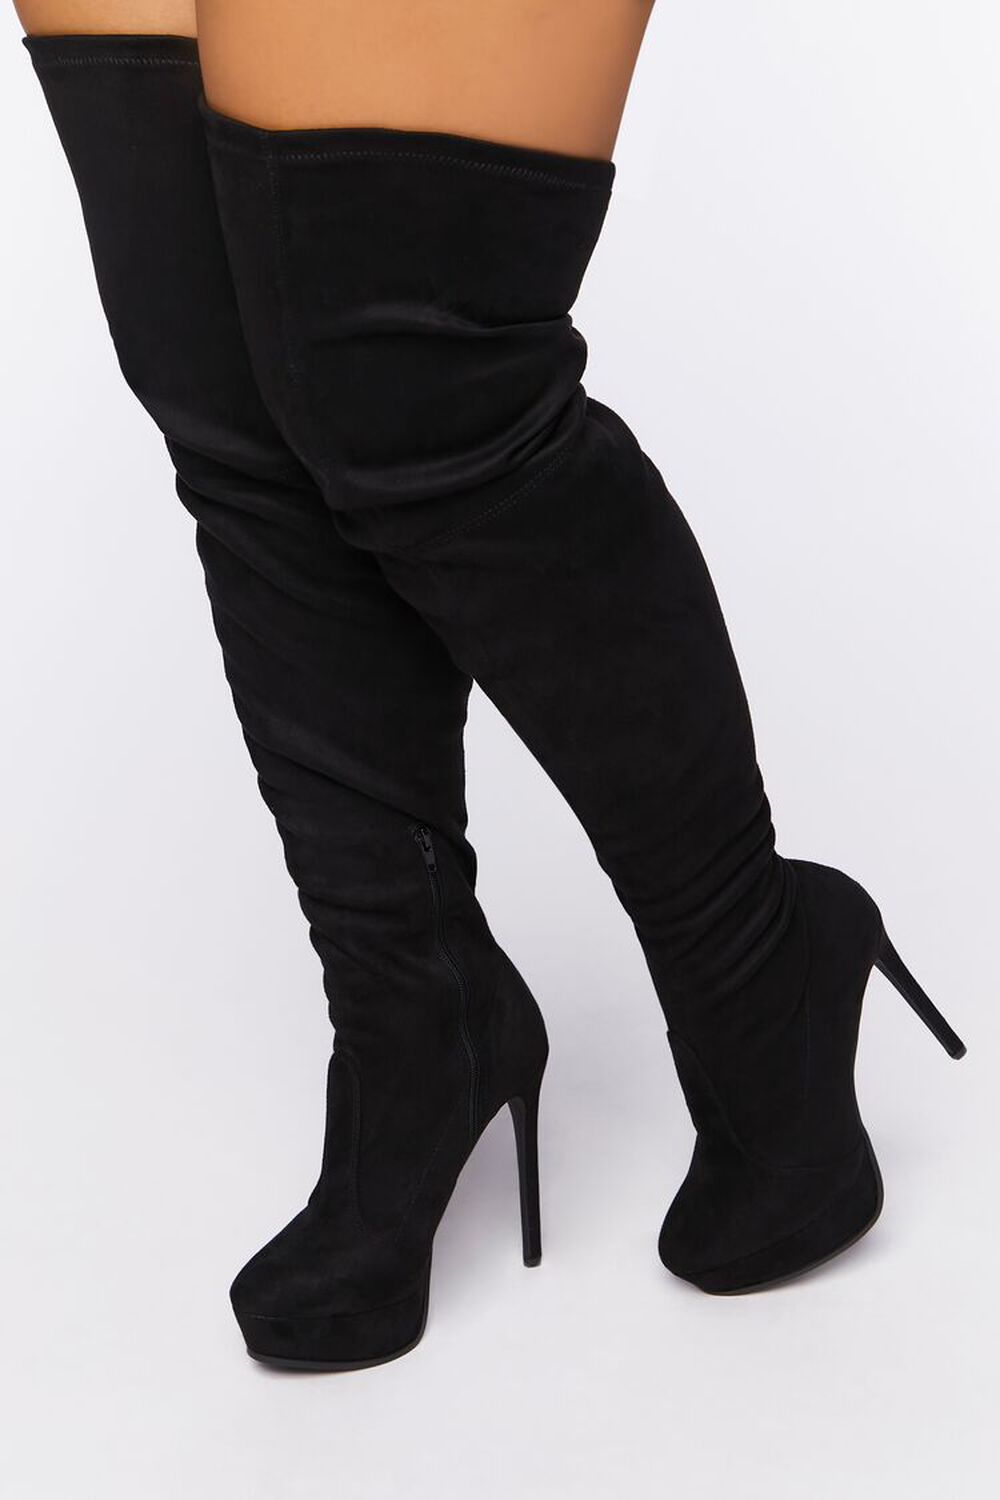 Faux Suede Over-the-Knee Boots (Wide)